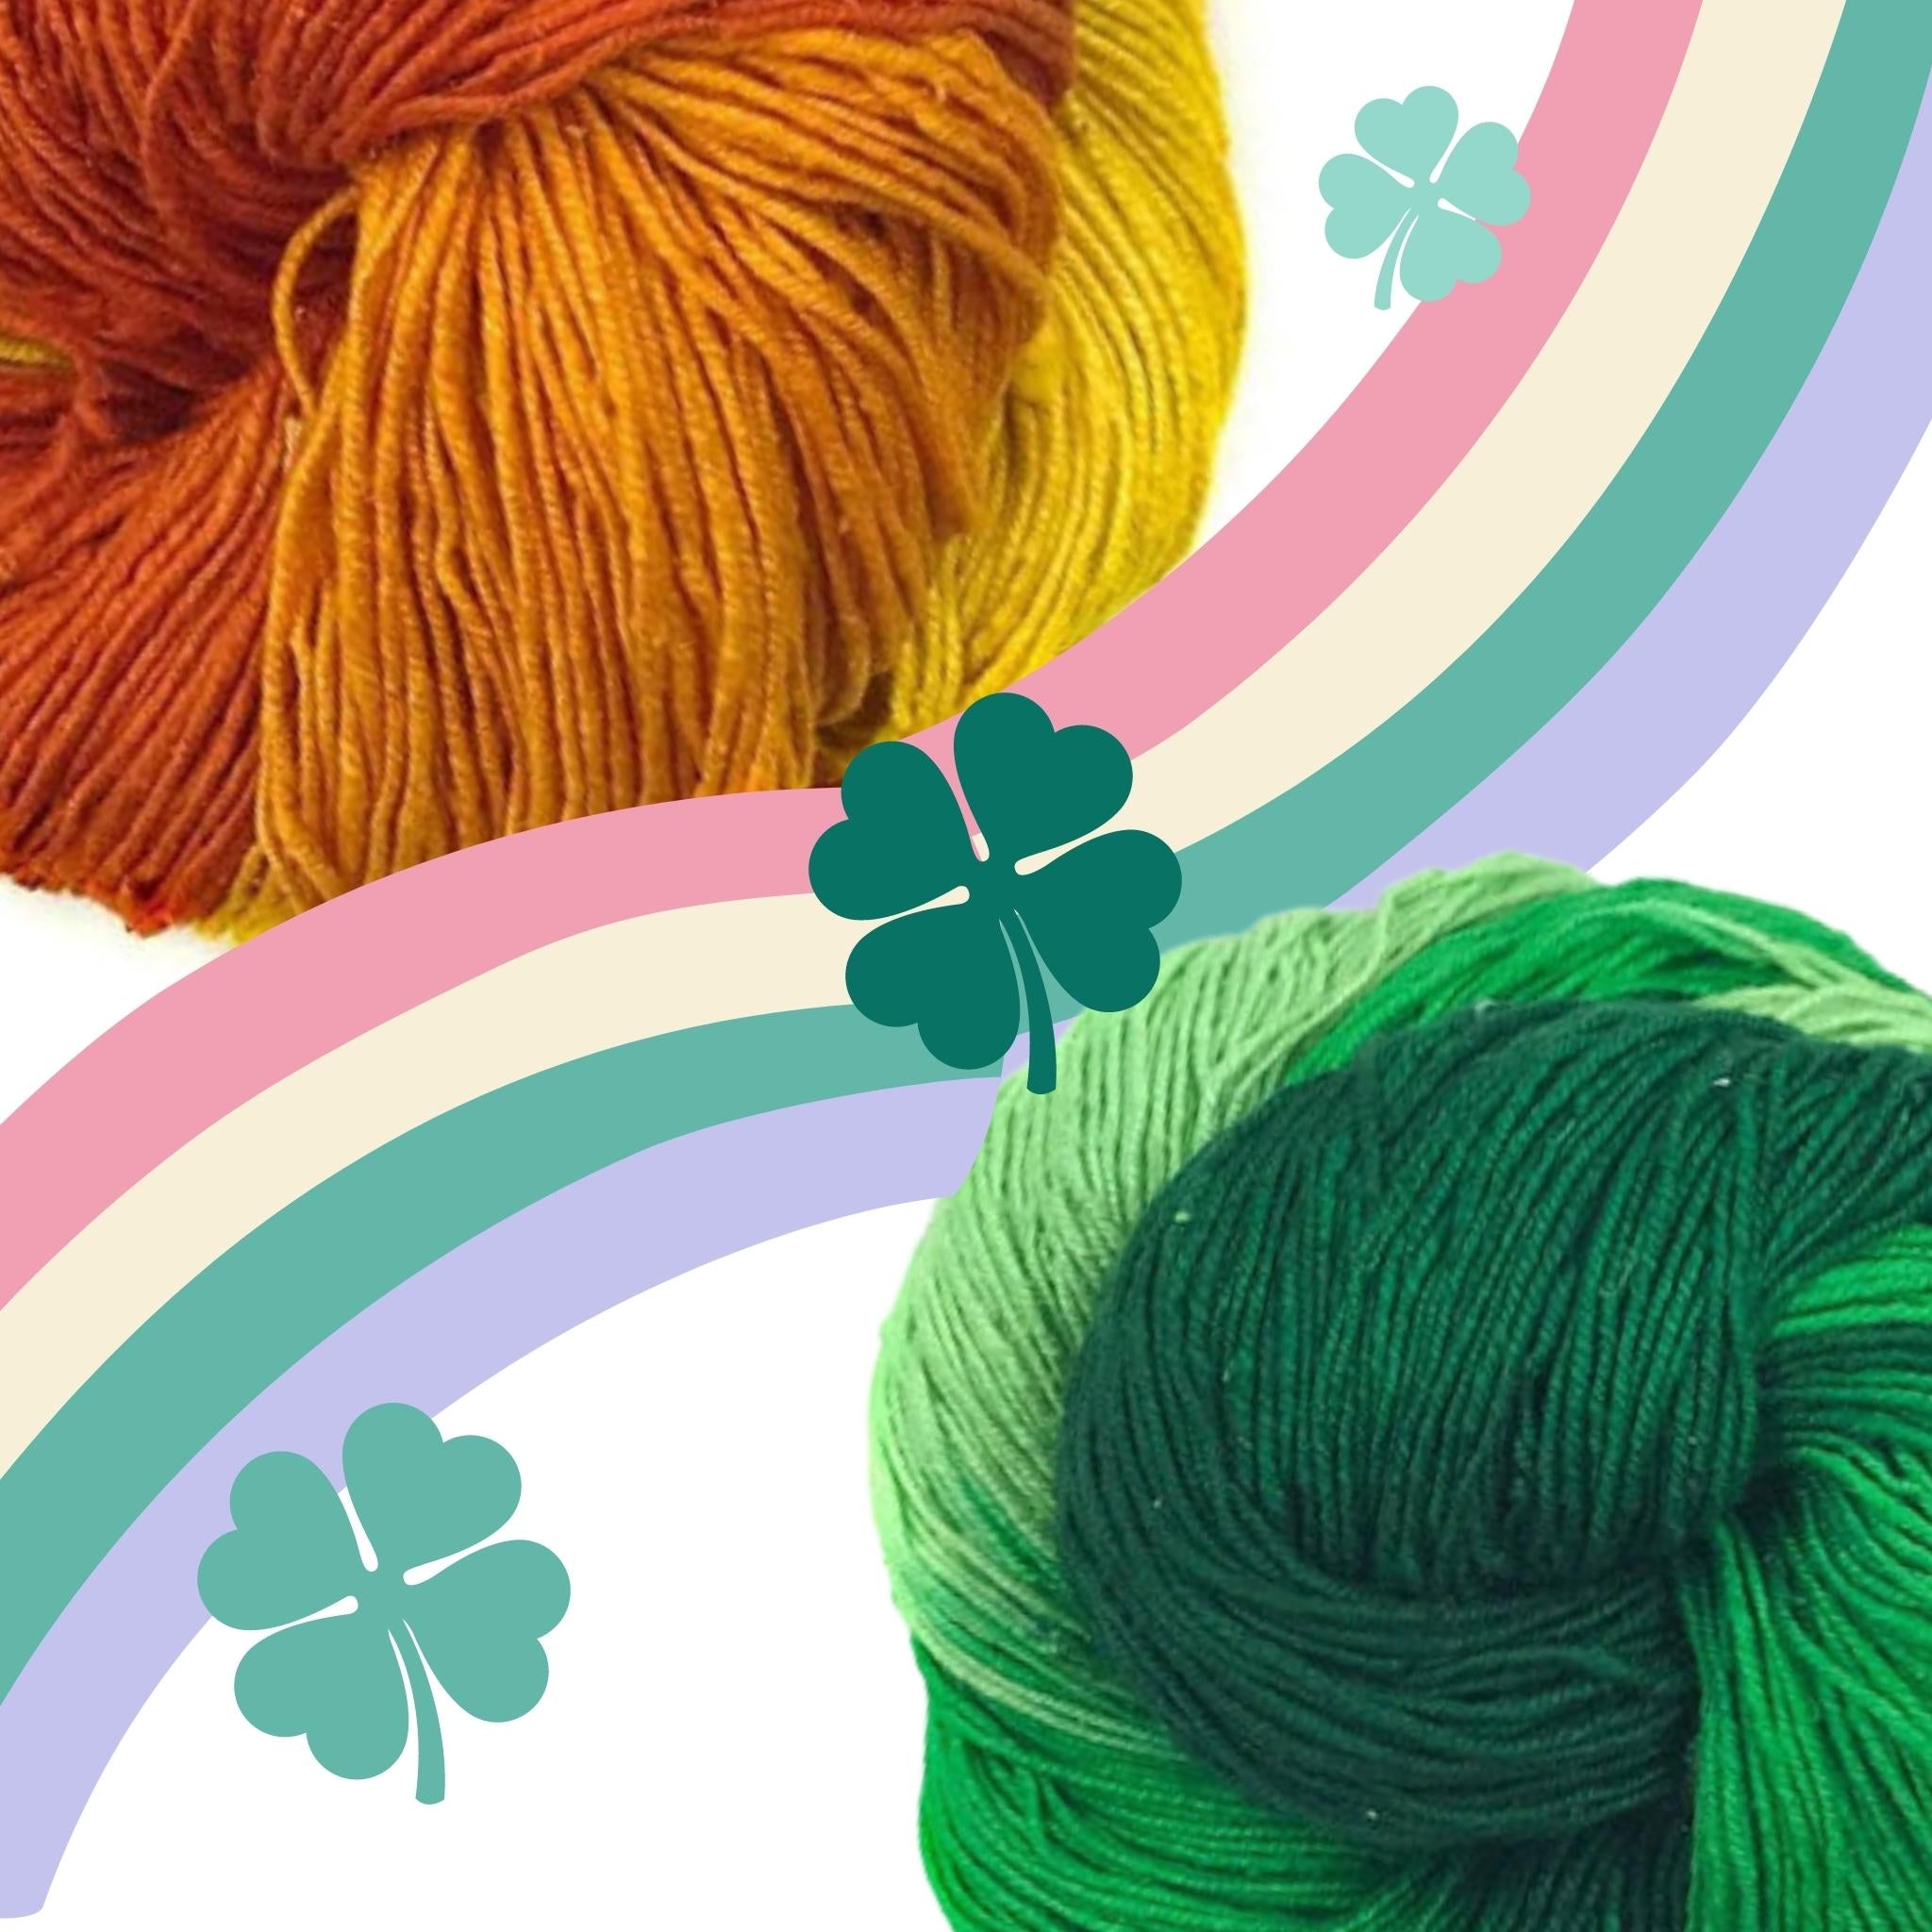 3 Festive St. Patrick’s Day Craft Ideas For the Whole Family - Darn Good Yarn